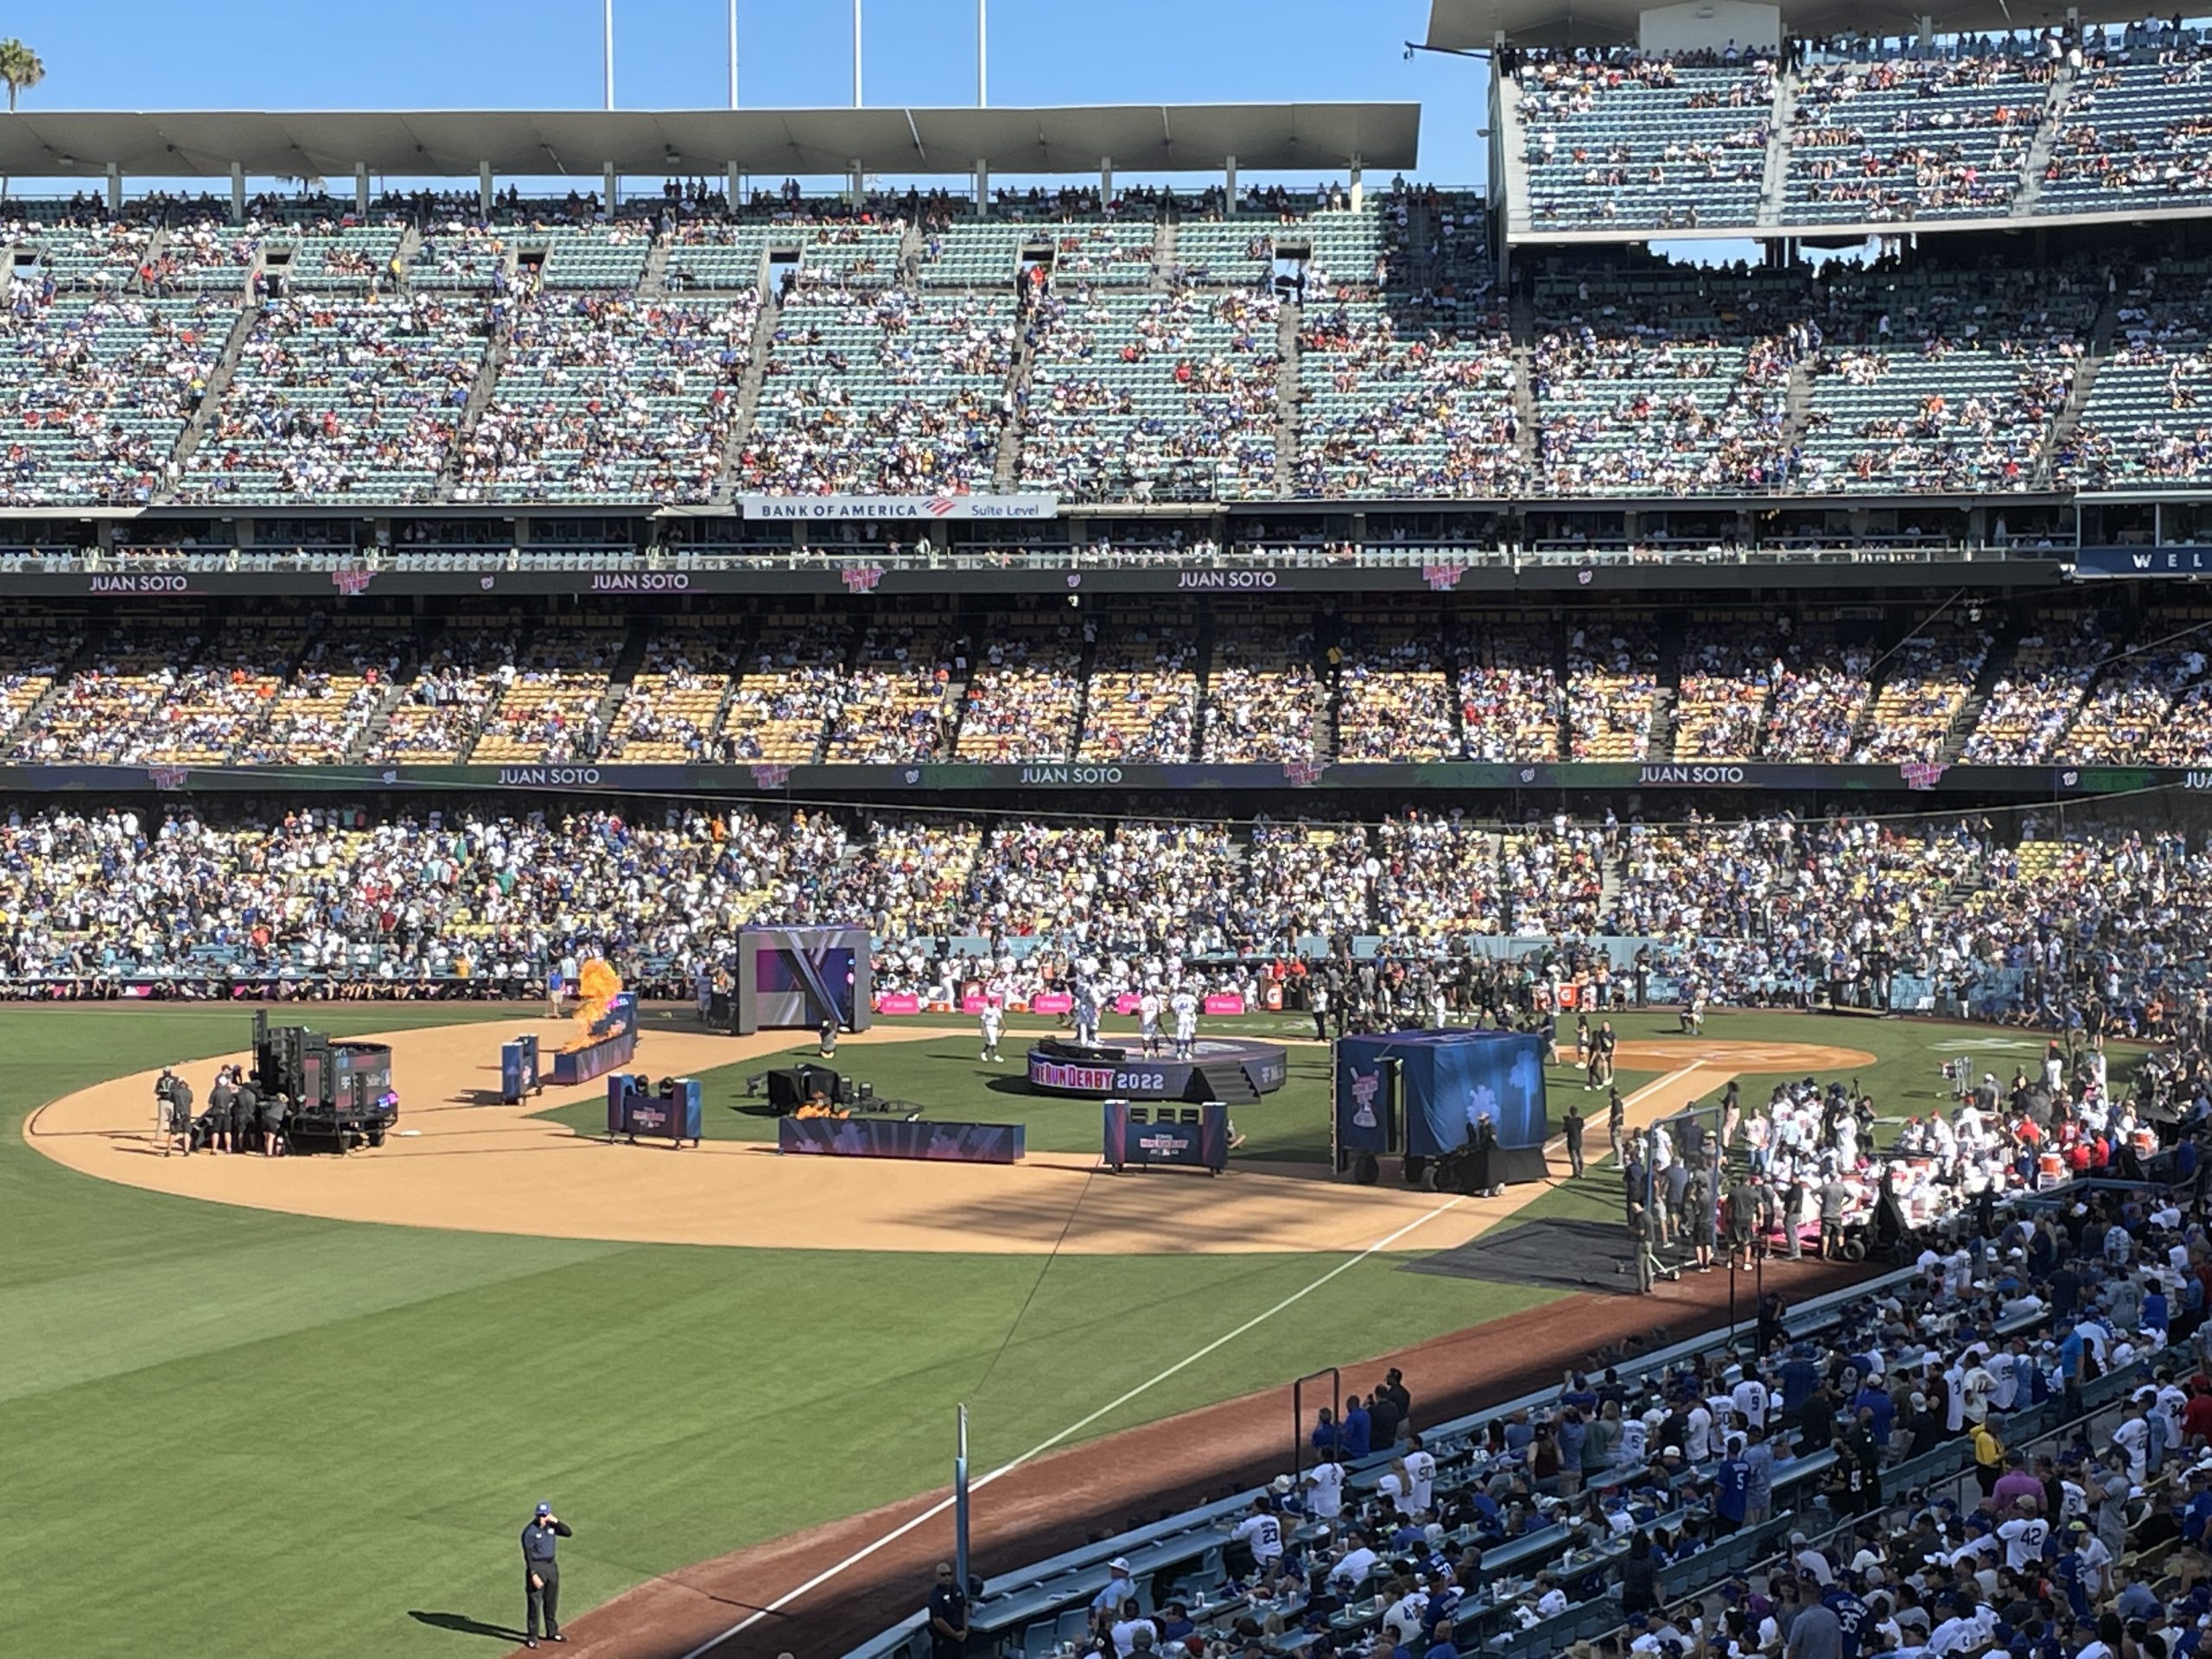 Live From MLB All-Star 2022 DodgerVision Churns Out In-Venue Entertainment for Multiple Events